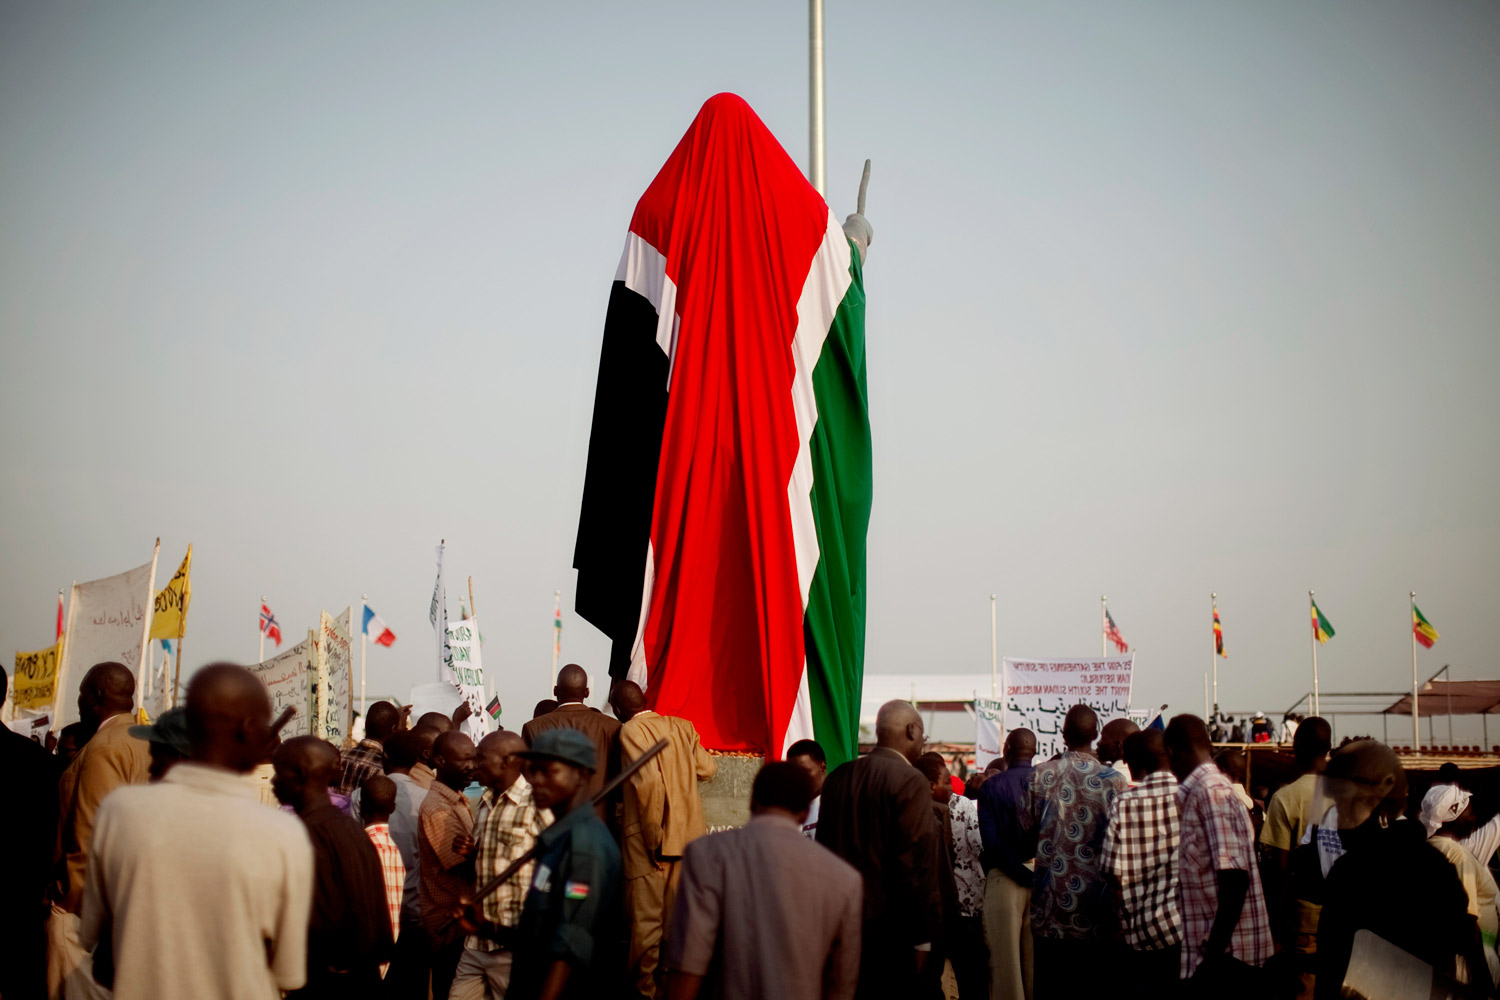 July 9, 2011. A newly constructed statue commemorating the late Dr. John Garang, the leader of the Sudan People's Liberation Army is covered by the new flag in the capital city of Juba. The statue was constructed ahead of southern Sudan's declaration of independence and later unveiled by South Sudan's President, Salve Kiir.